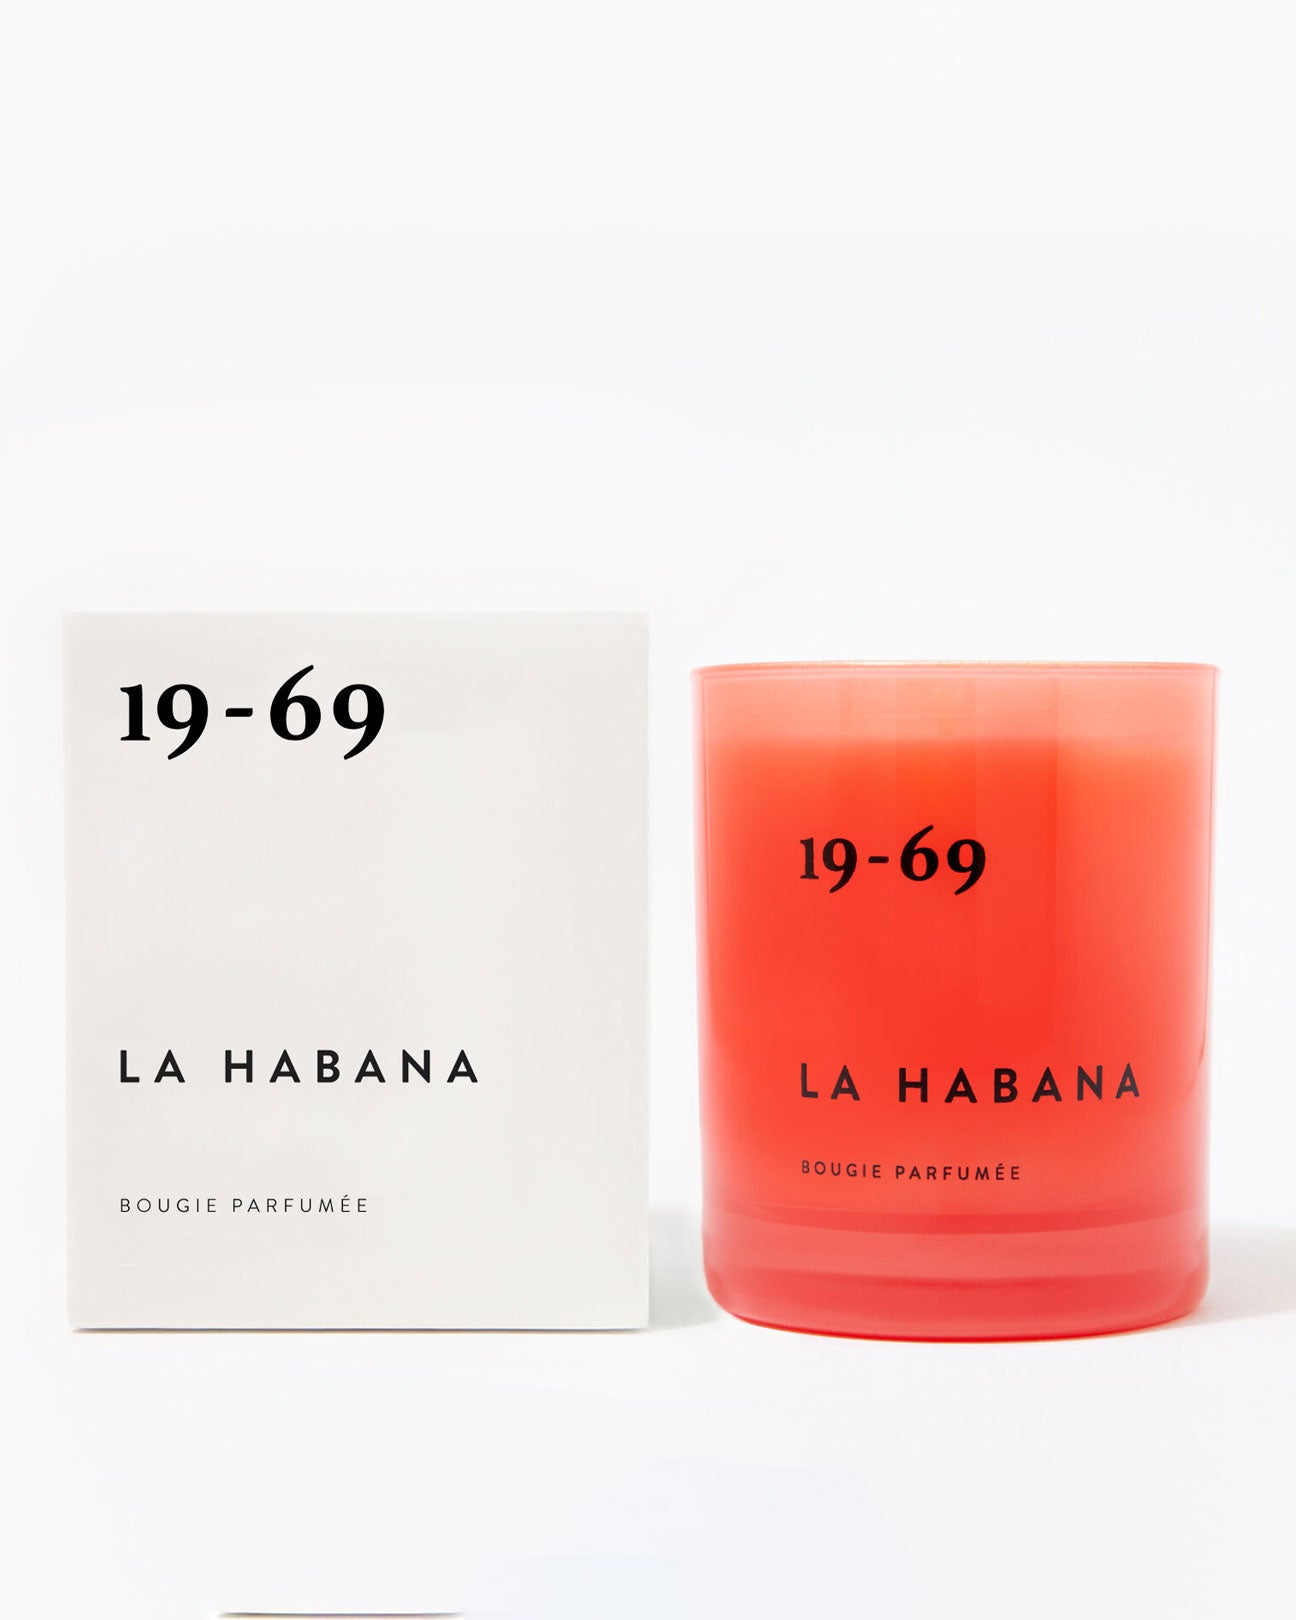 19-69 Candle in La Habana available at Lahn.shop